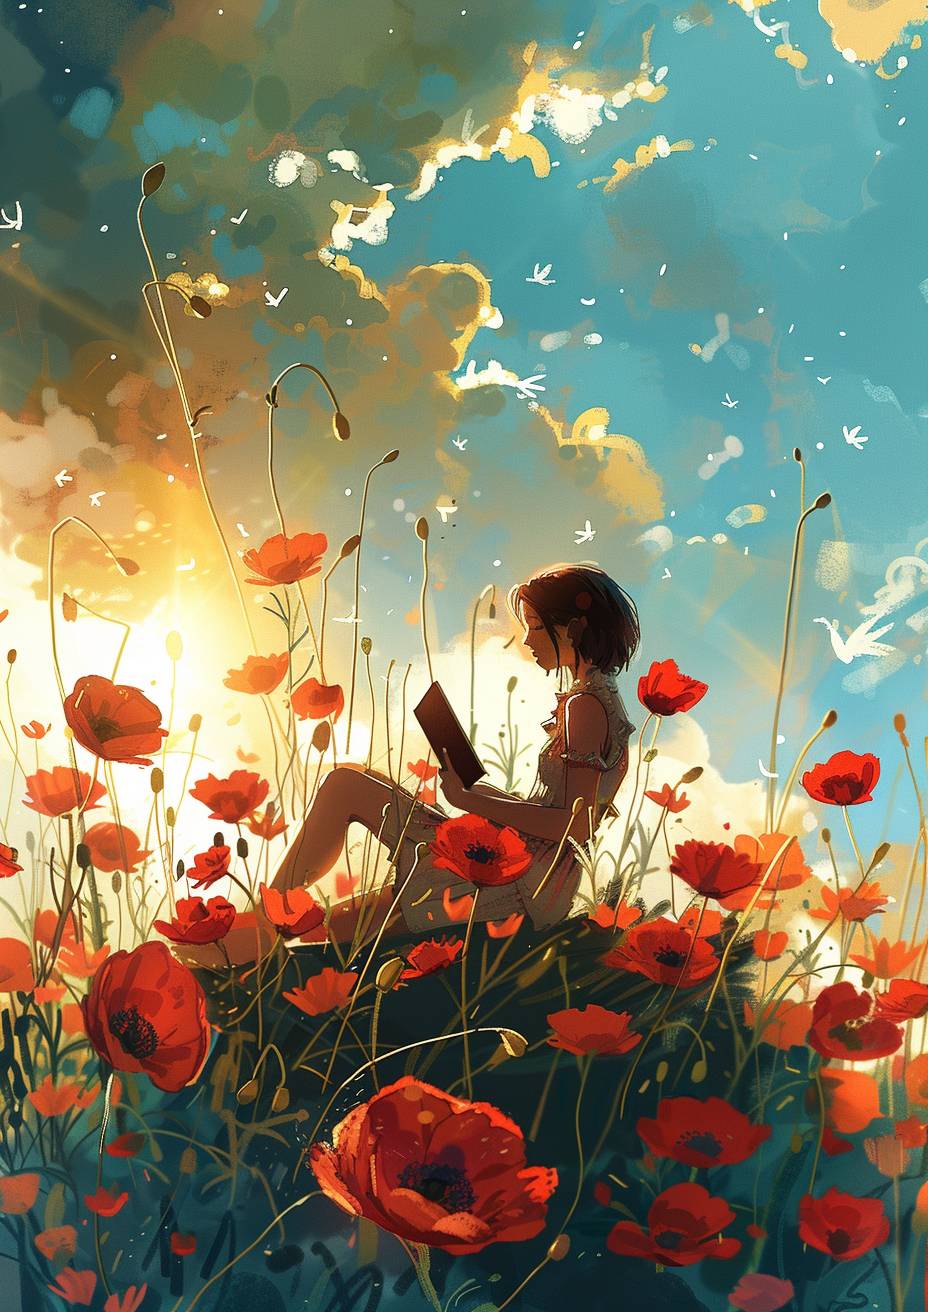 A girl is sitting on top of poppies reading, with the sun shining behind her.